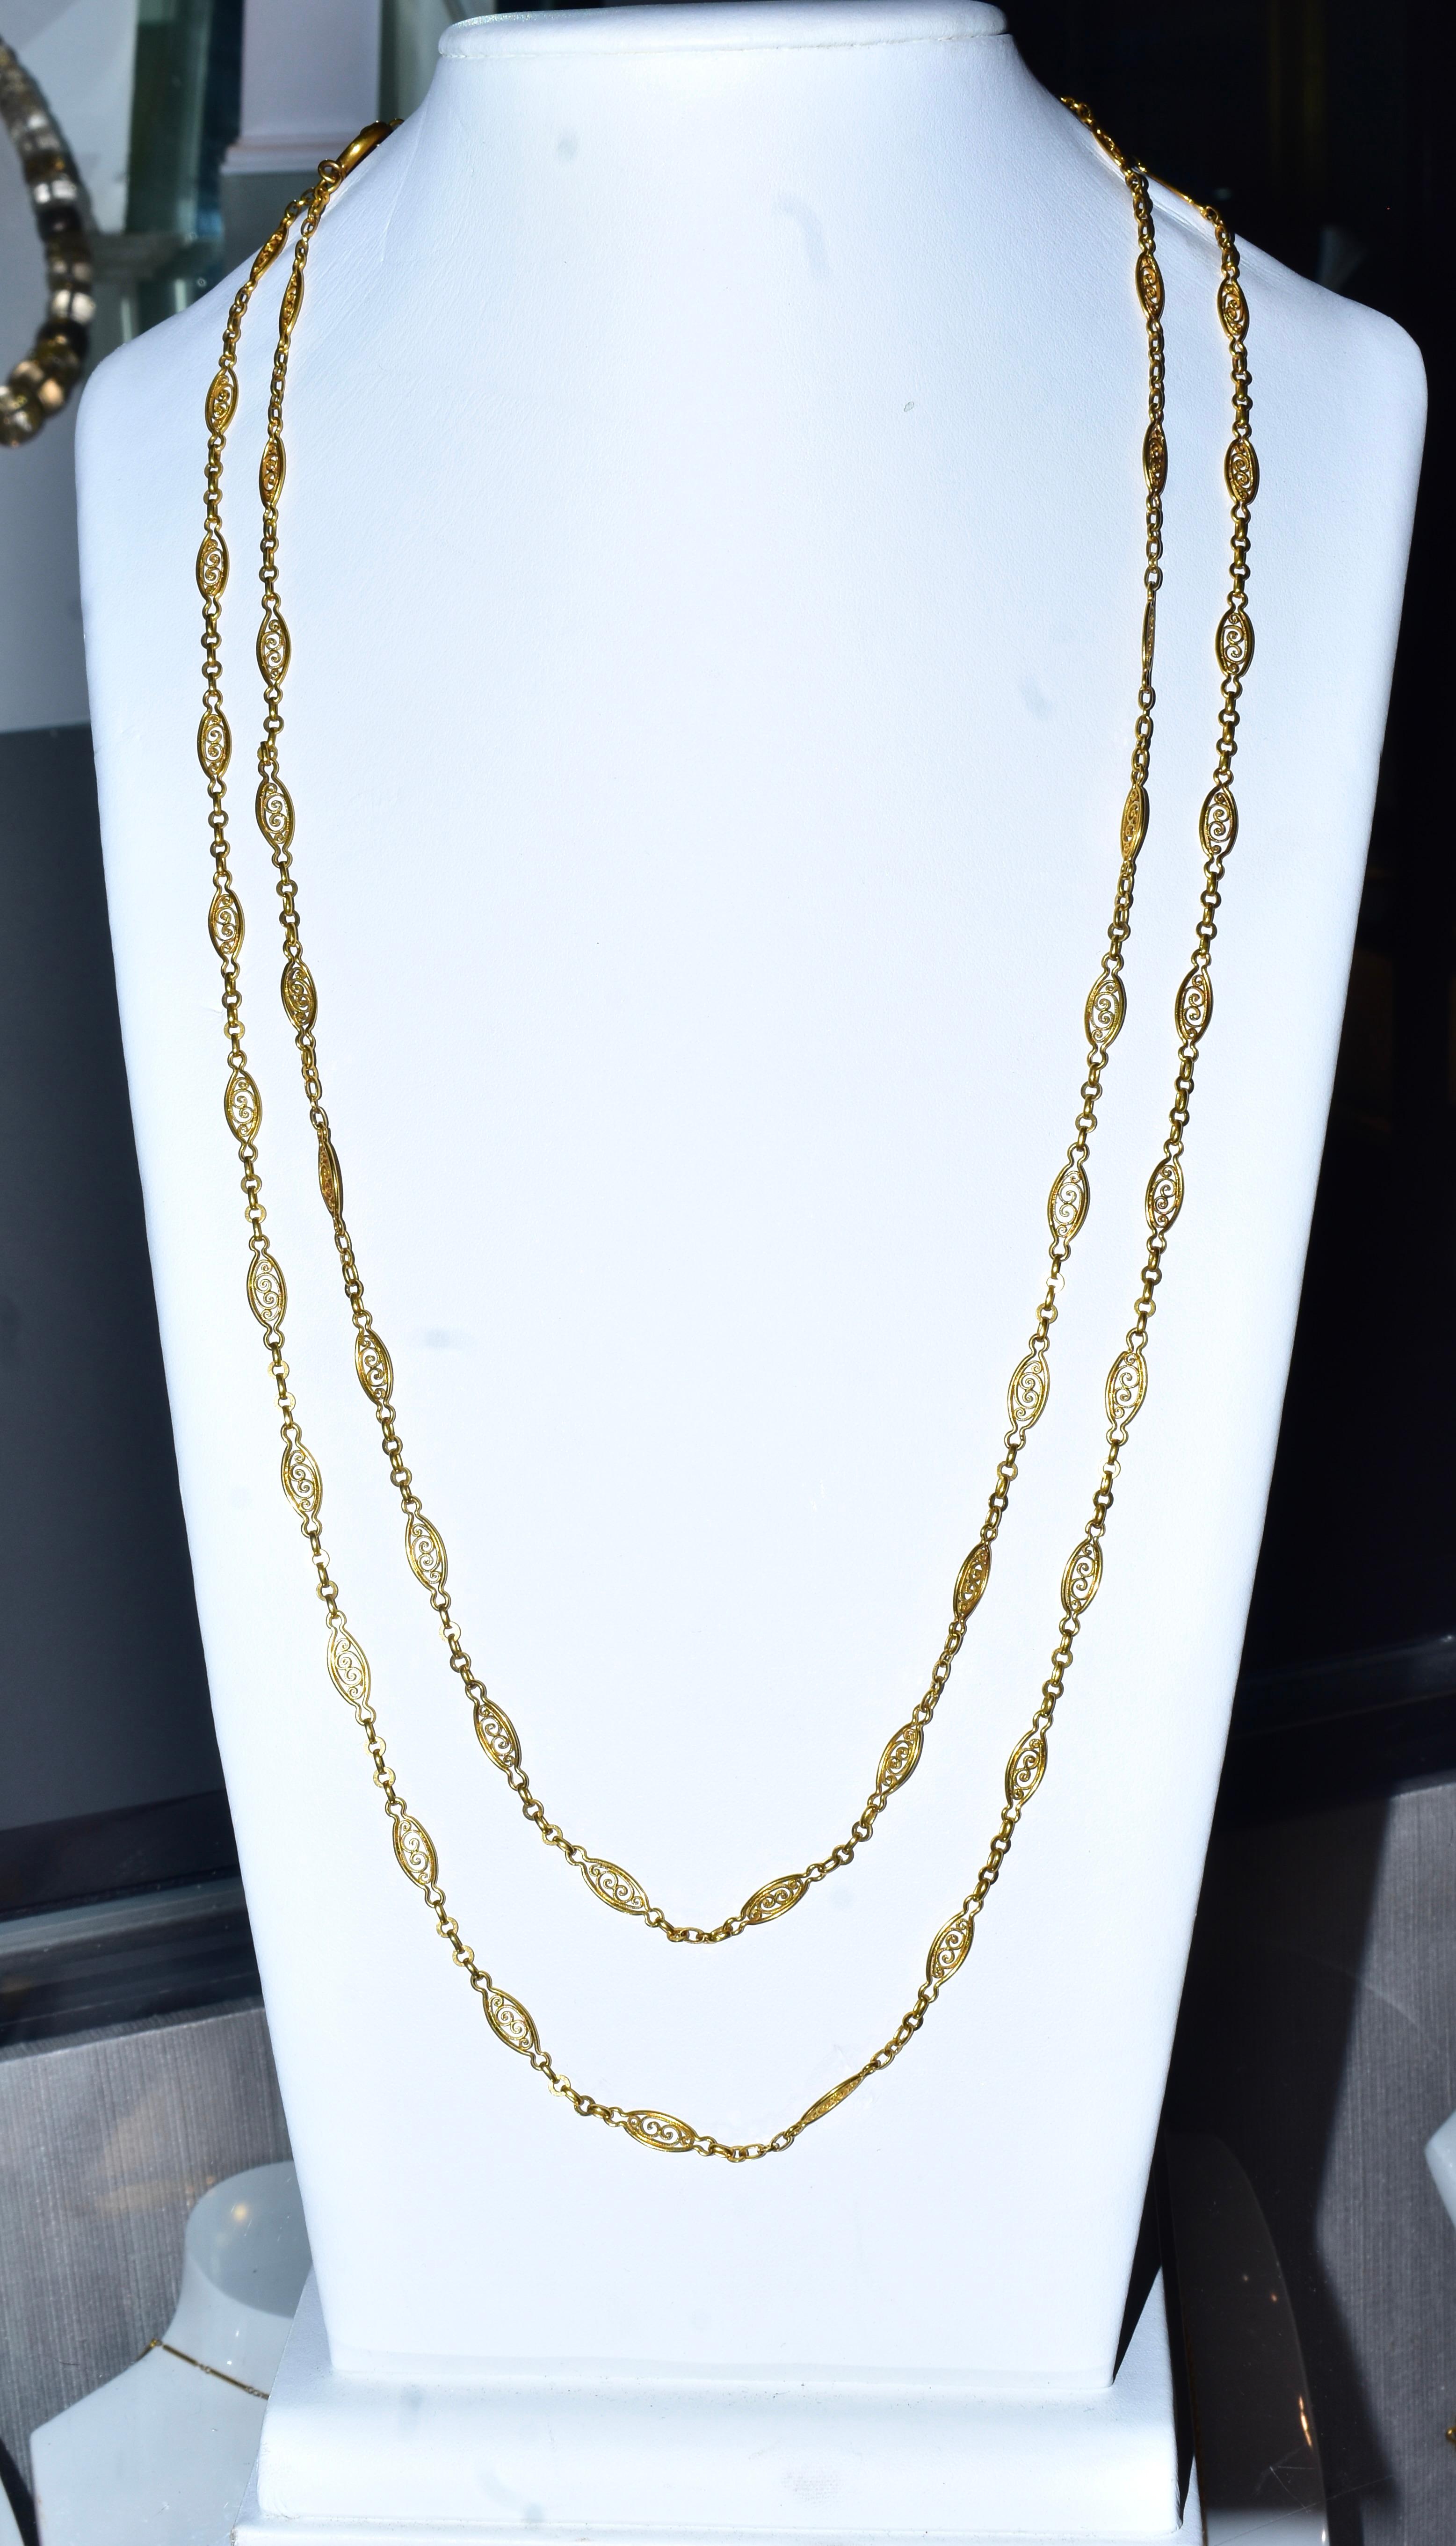 Belle Époque Antique French 18K Gold 59.5 Inch Long Intricate Link Chain, c. 1900